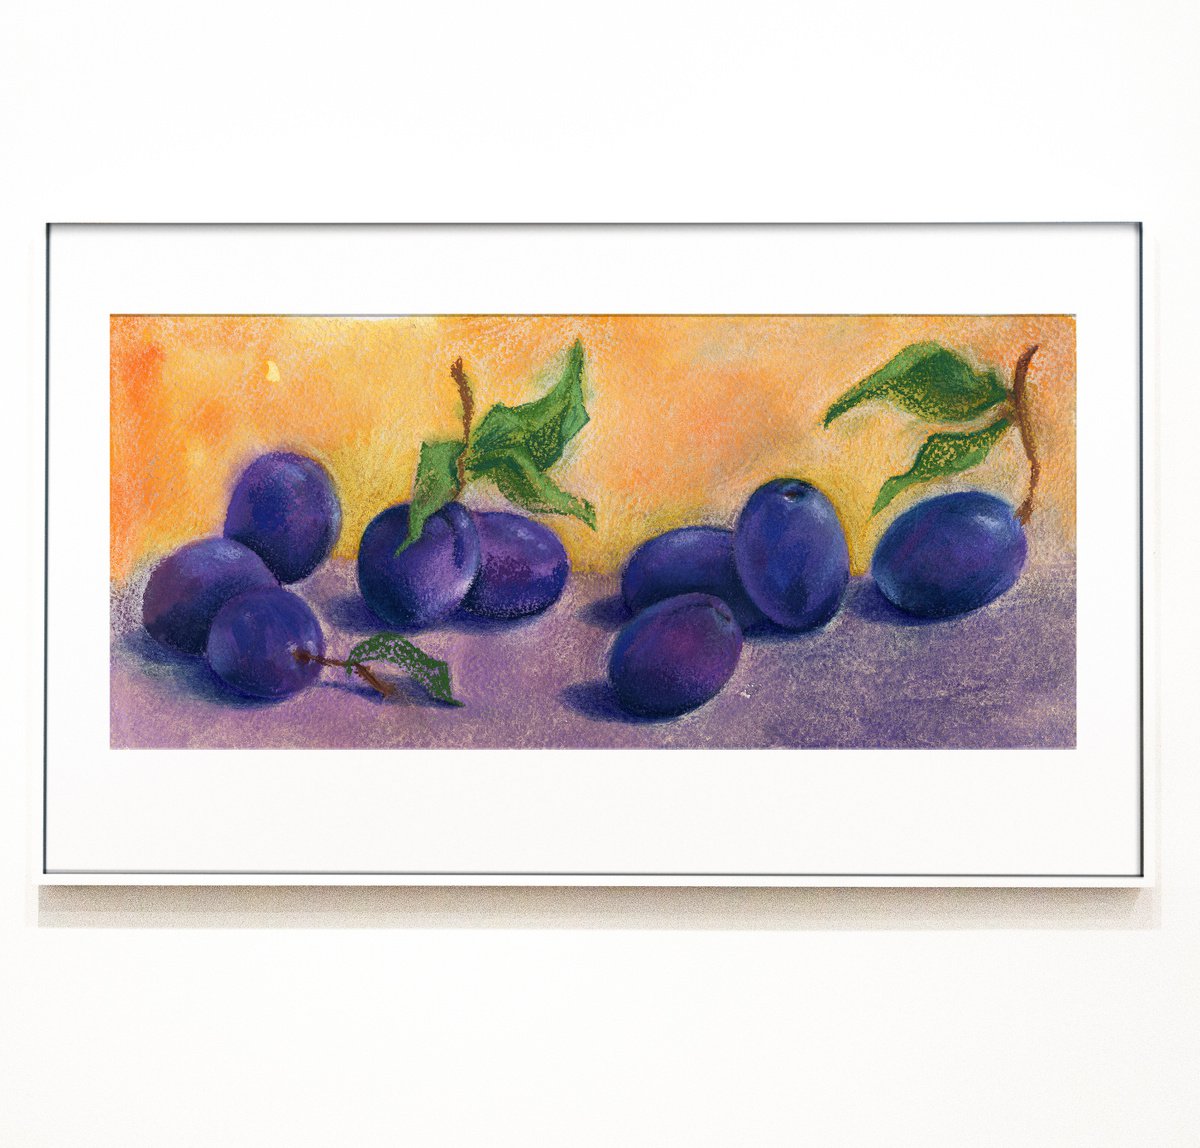 Sweet plums by Mia